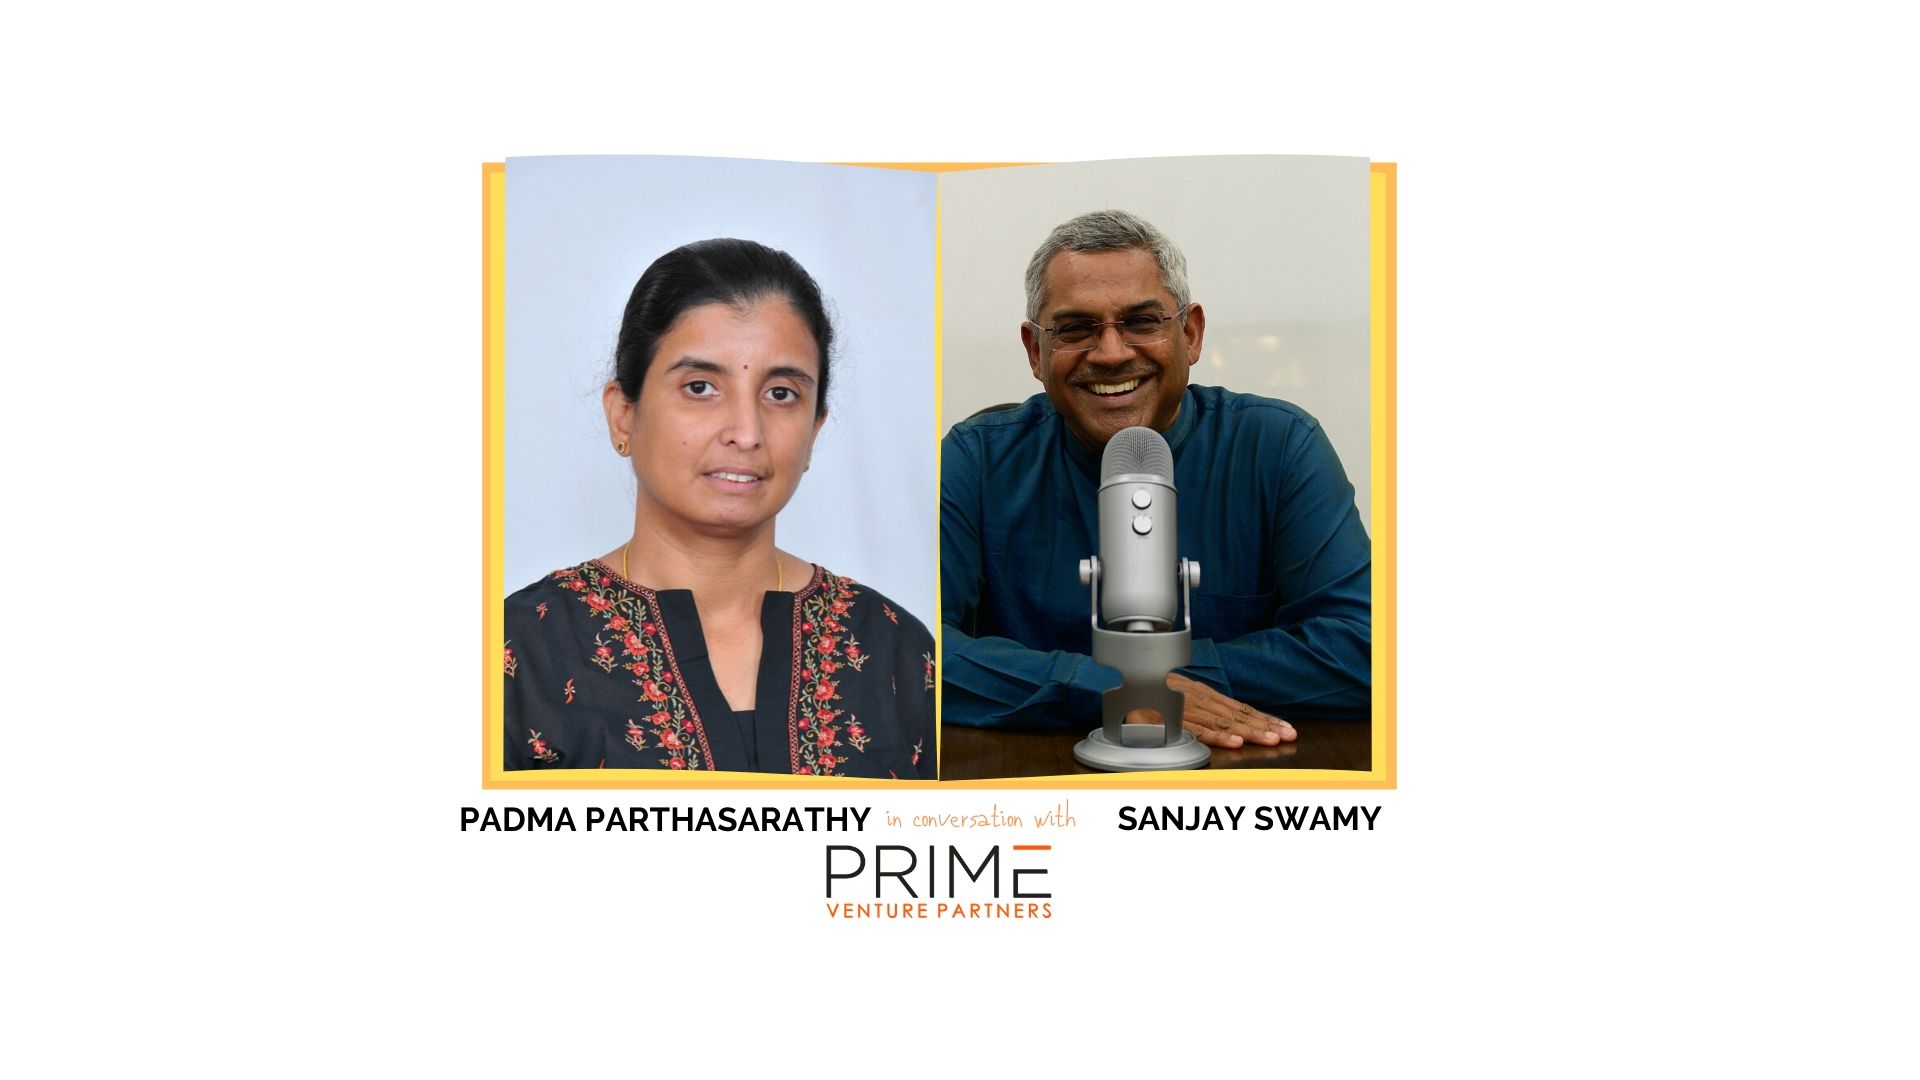 A graphic with guest(Padma Parthasarathy) and host's (Sanjay Swamy) name and image.